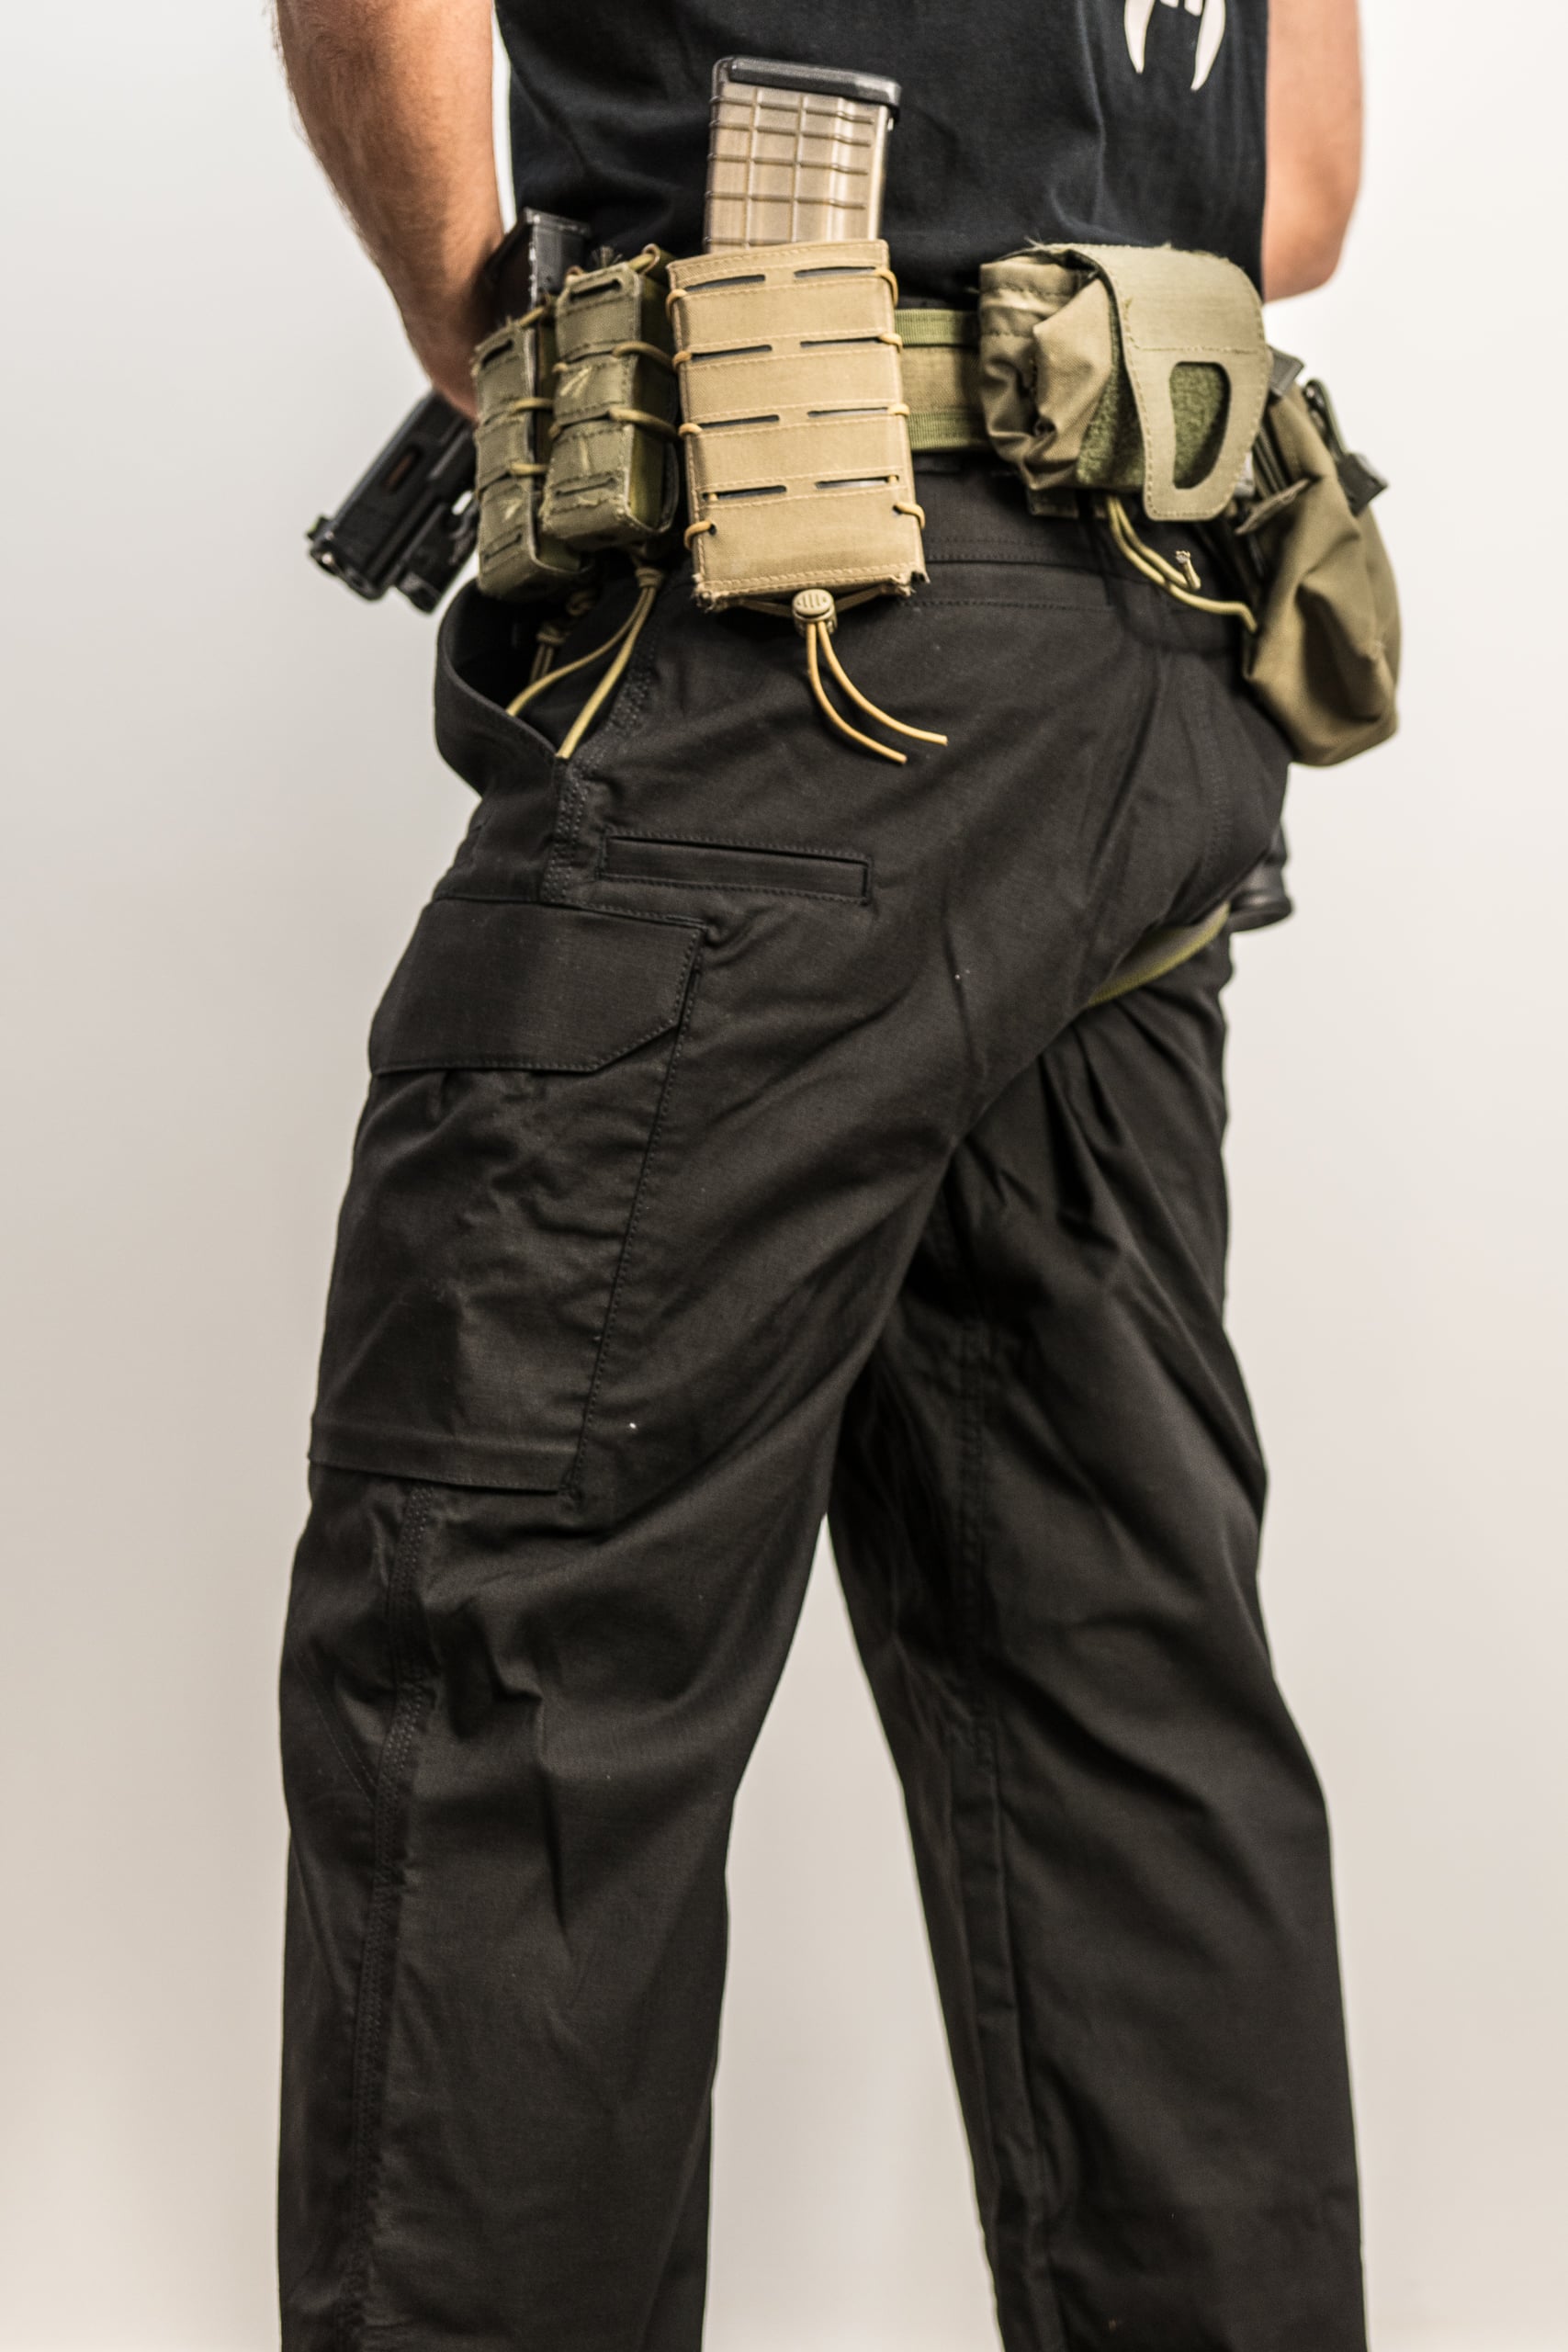 First Tactical Men's Tactix Pants Marine Cadet Ripstop Trousers Midnight Navy 